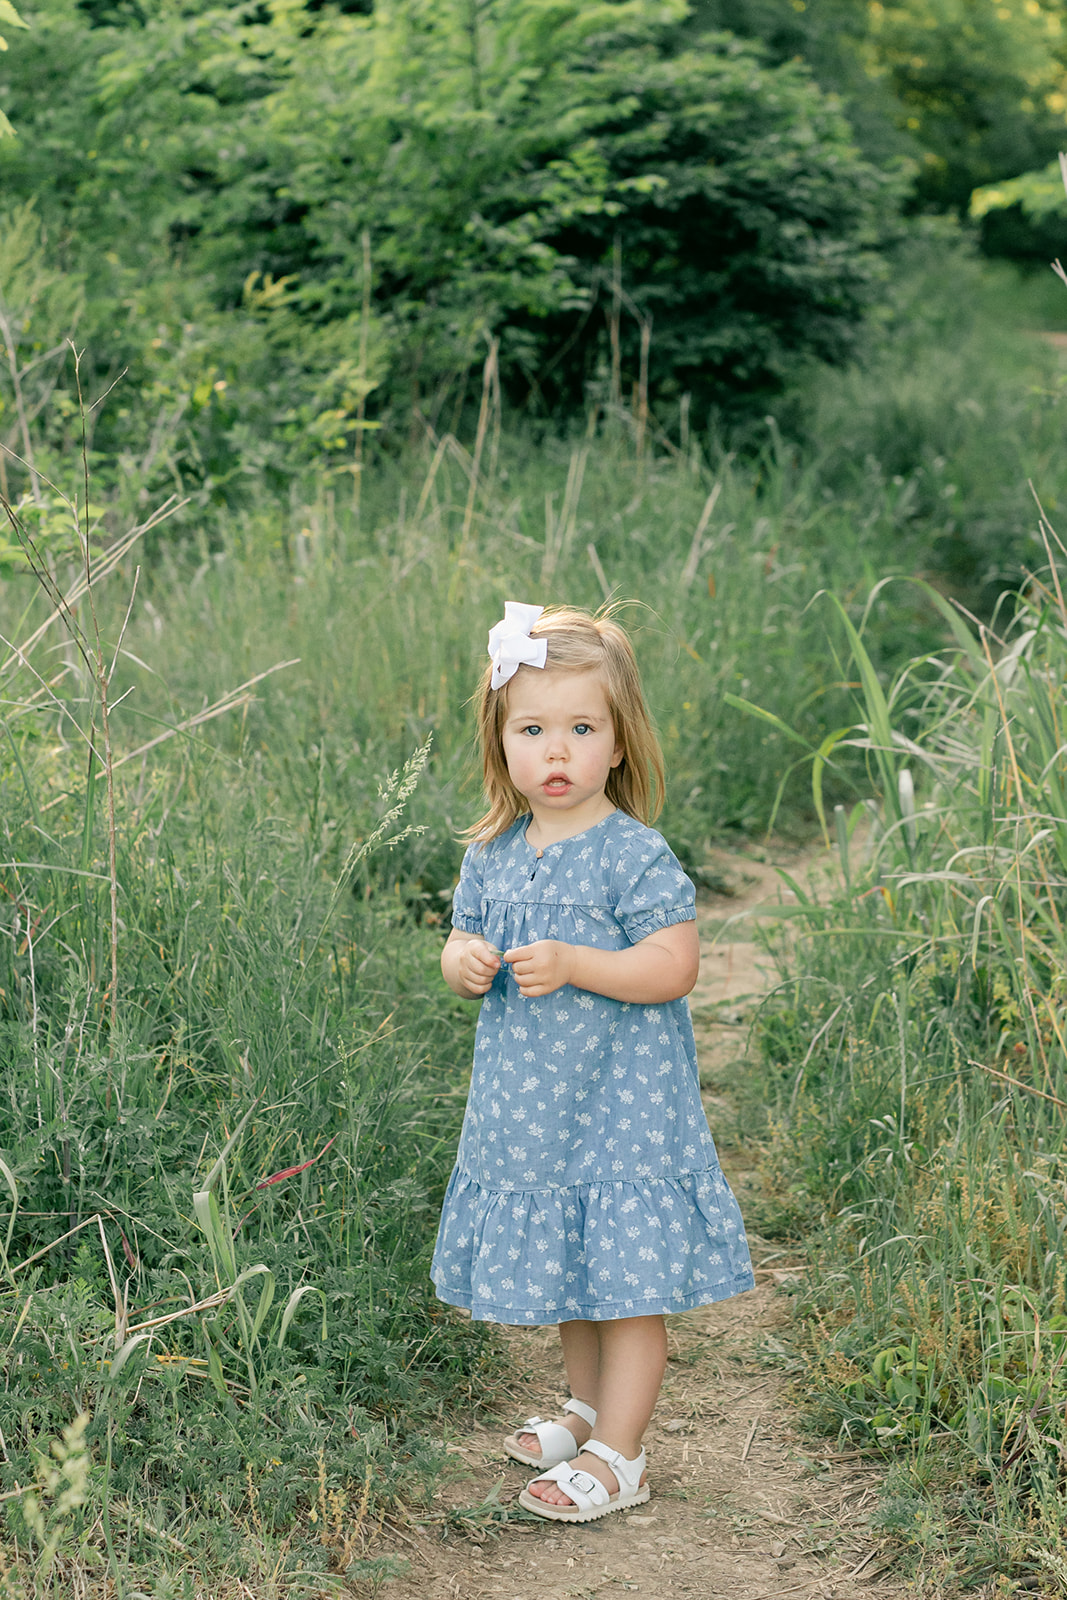 outdoor family photos for 2 year baby milestone session in nashville tennessee. photo of little girl